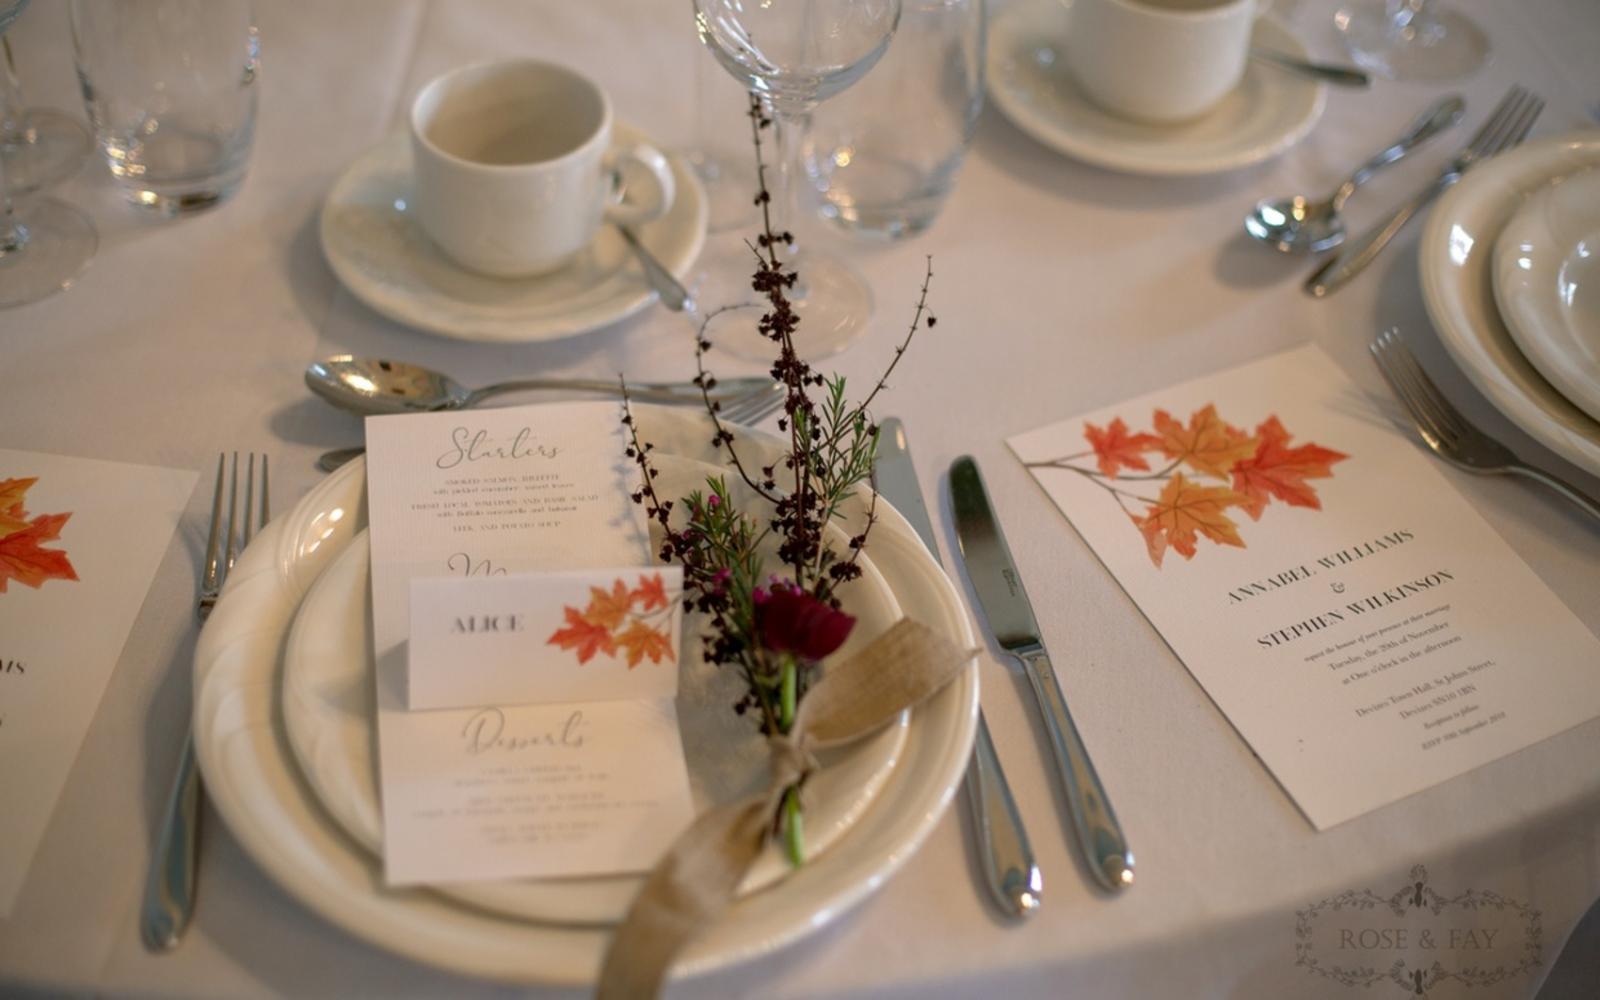 Styled Shot Avante Garde wedding venue Devizes Town Hall Whitewed Willoughby & Wolf Hibiscus & Hodge Pastel Designs classical whimsical autumnal rich stationery ideas furniture crockery cutlery glassware Mines Leisure Hire